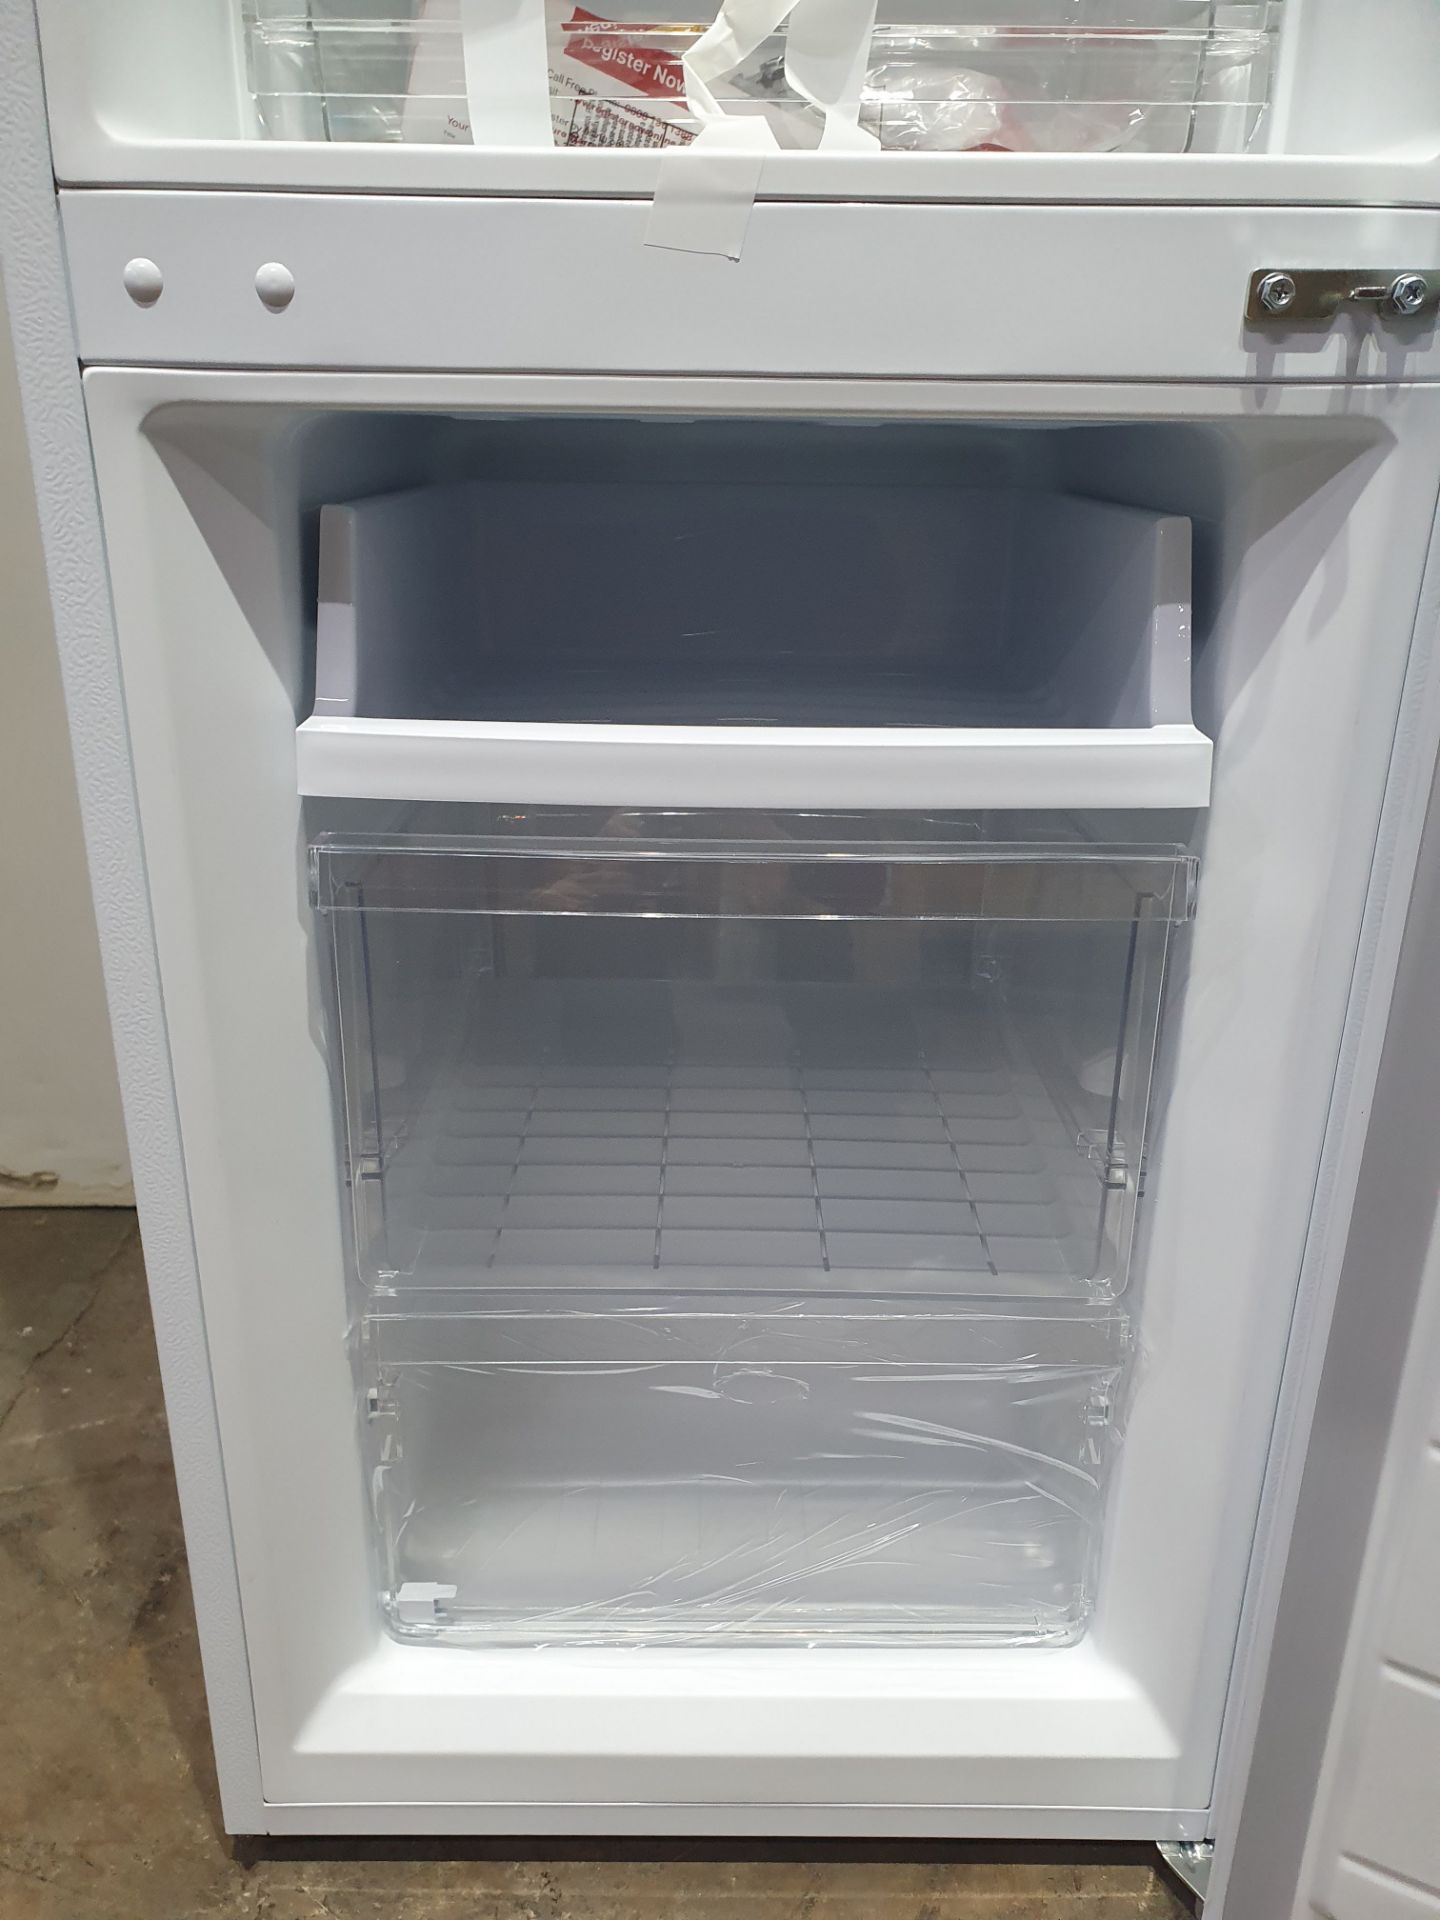 Ex-Display Montpellier MS150W Low Frost Fridge Freezer in White - Image 5 of 12